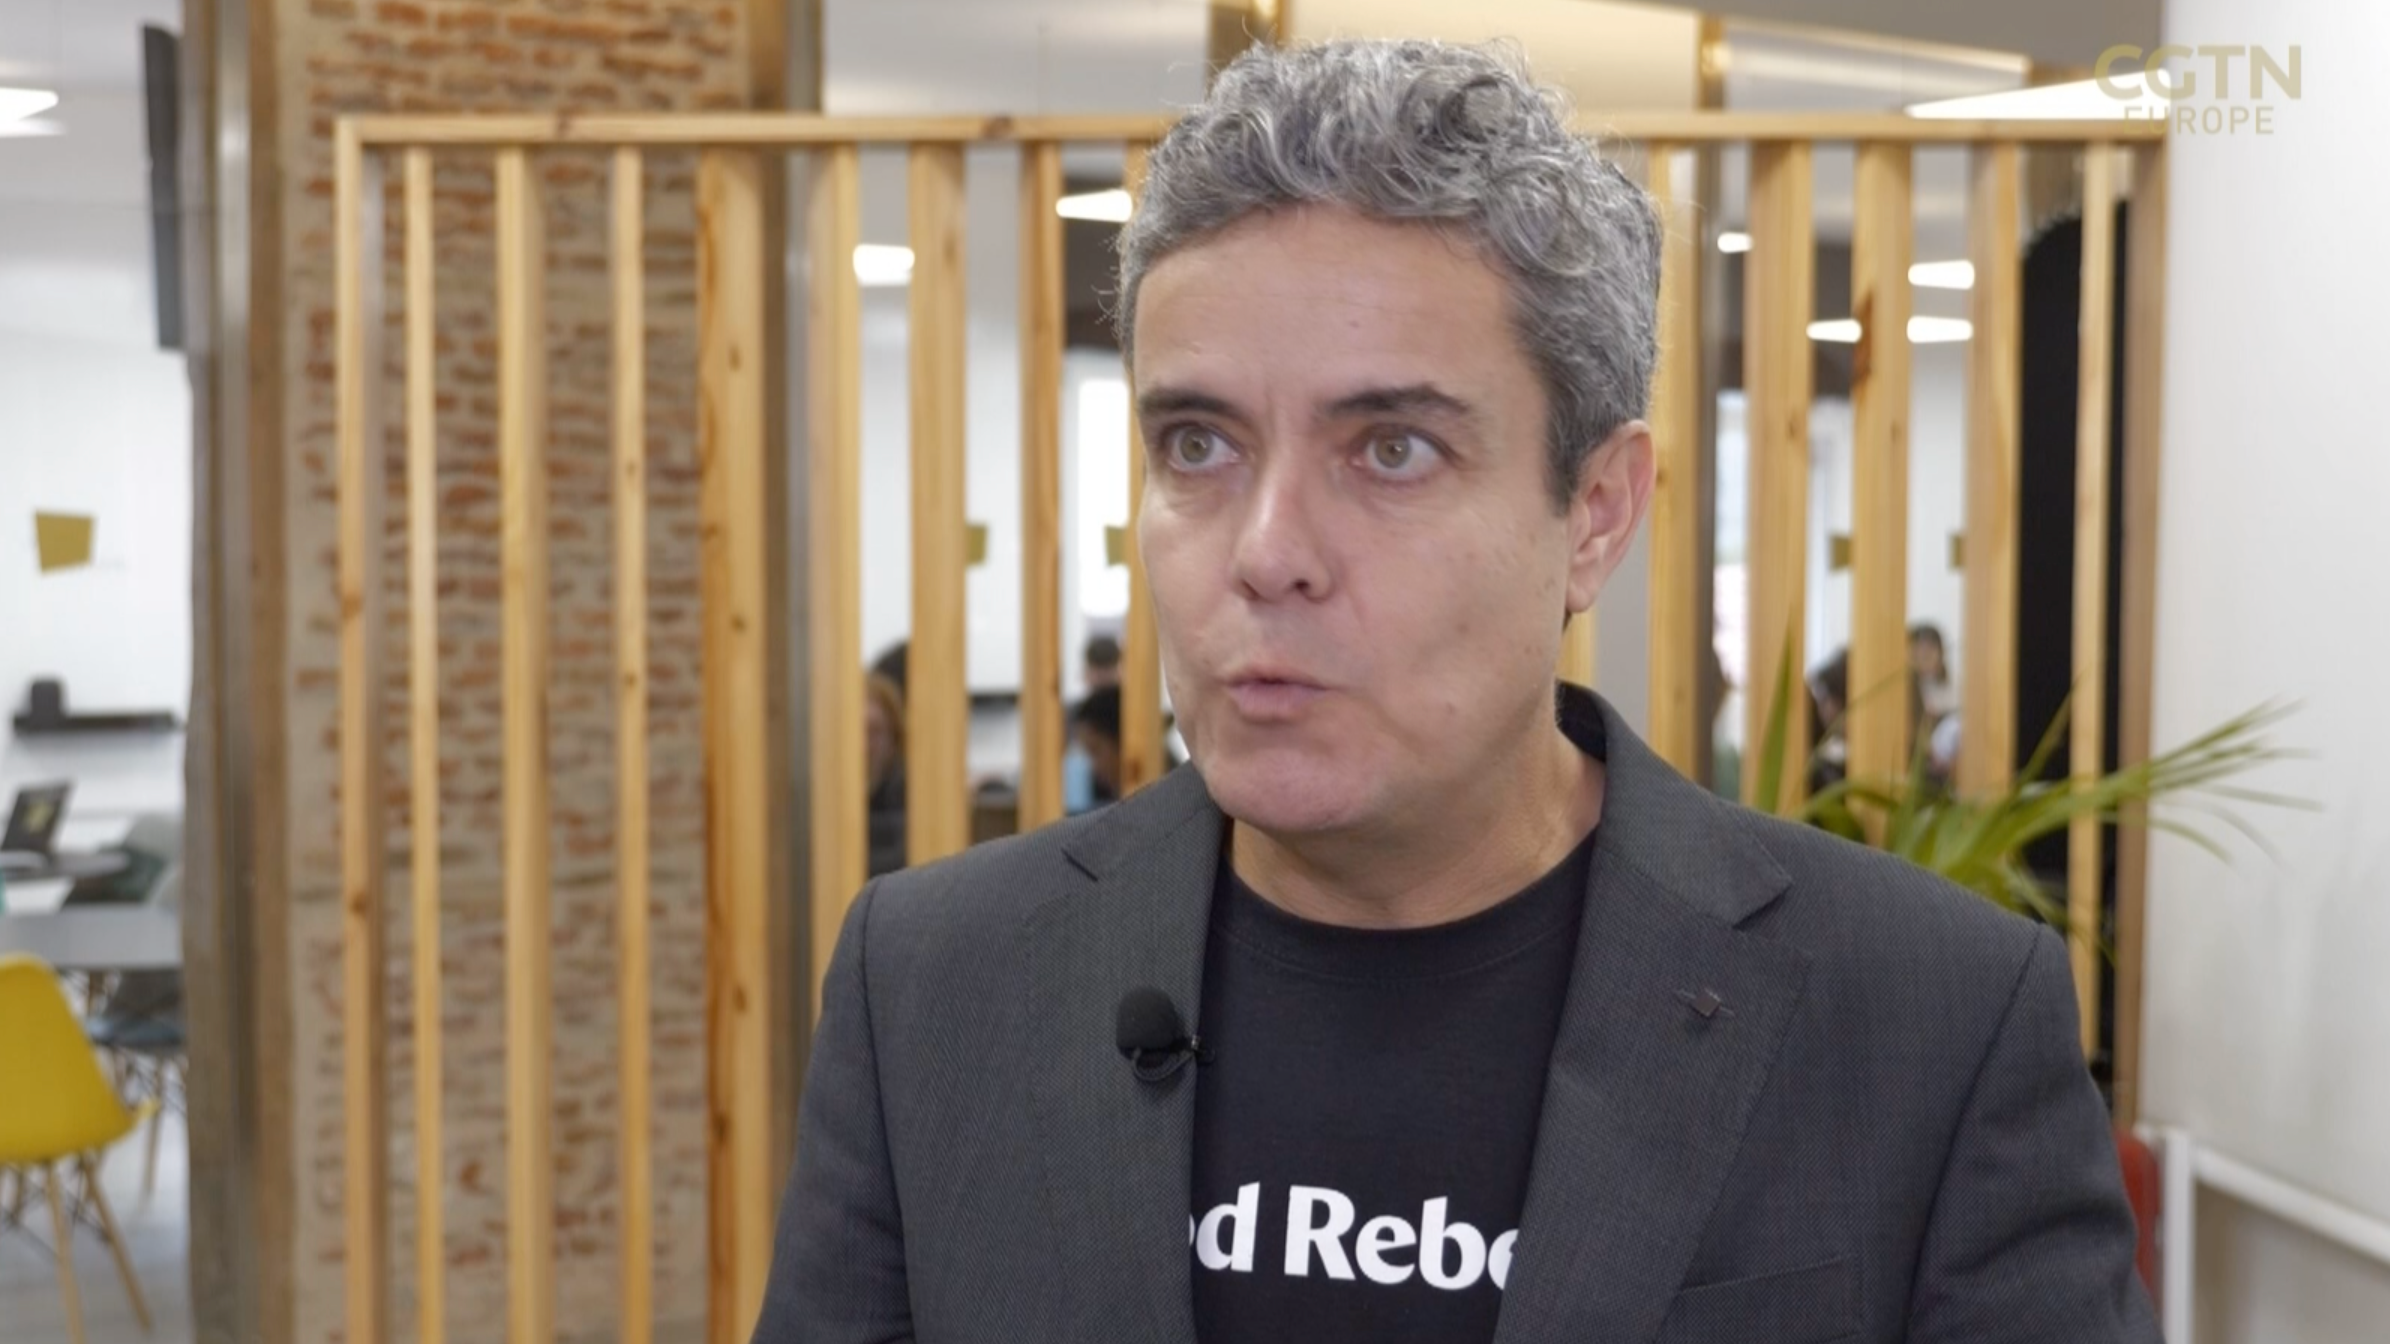 Good Rebels CEO Fernando Polo says productivity has increased since the four-day working week was introduced. /CGTN